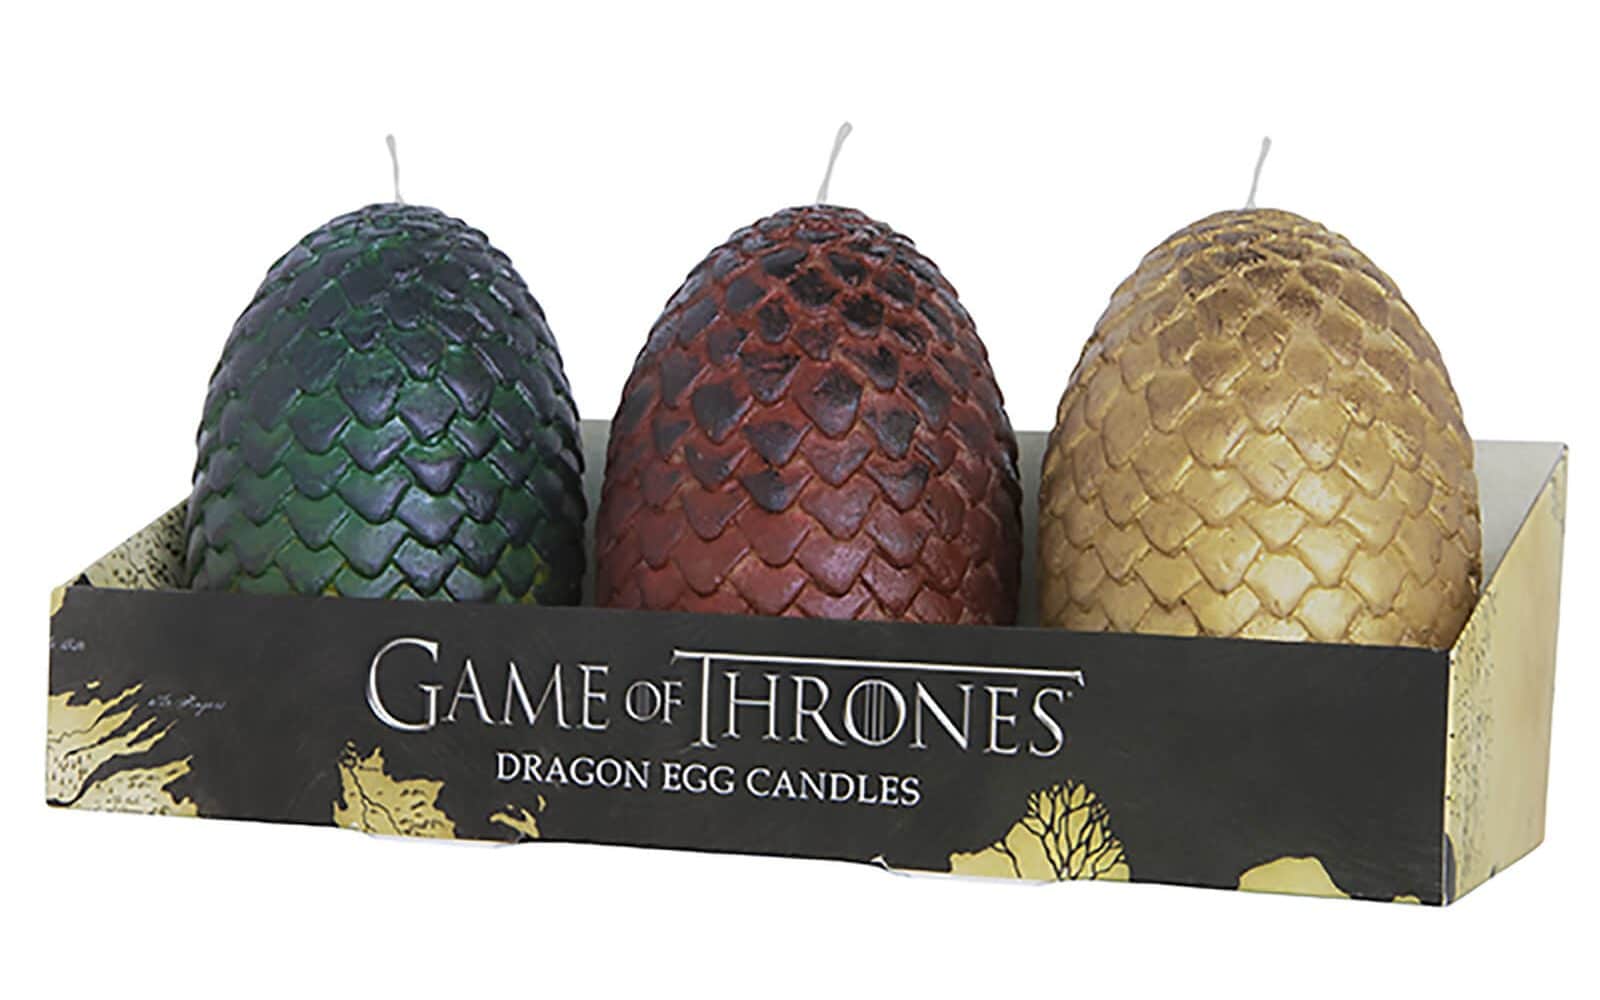 Unleash Your Passion for GOT with Game of Thrones Official Merchandise